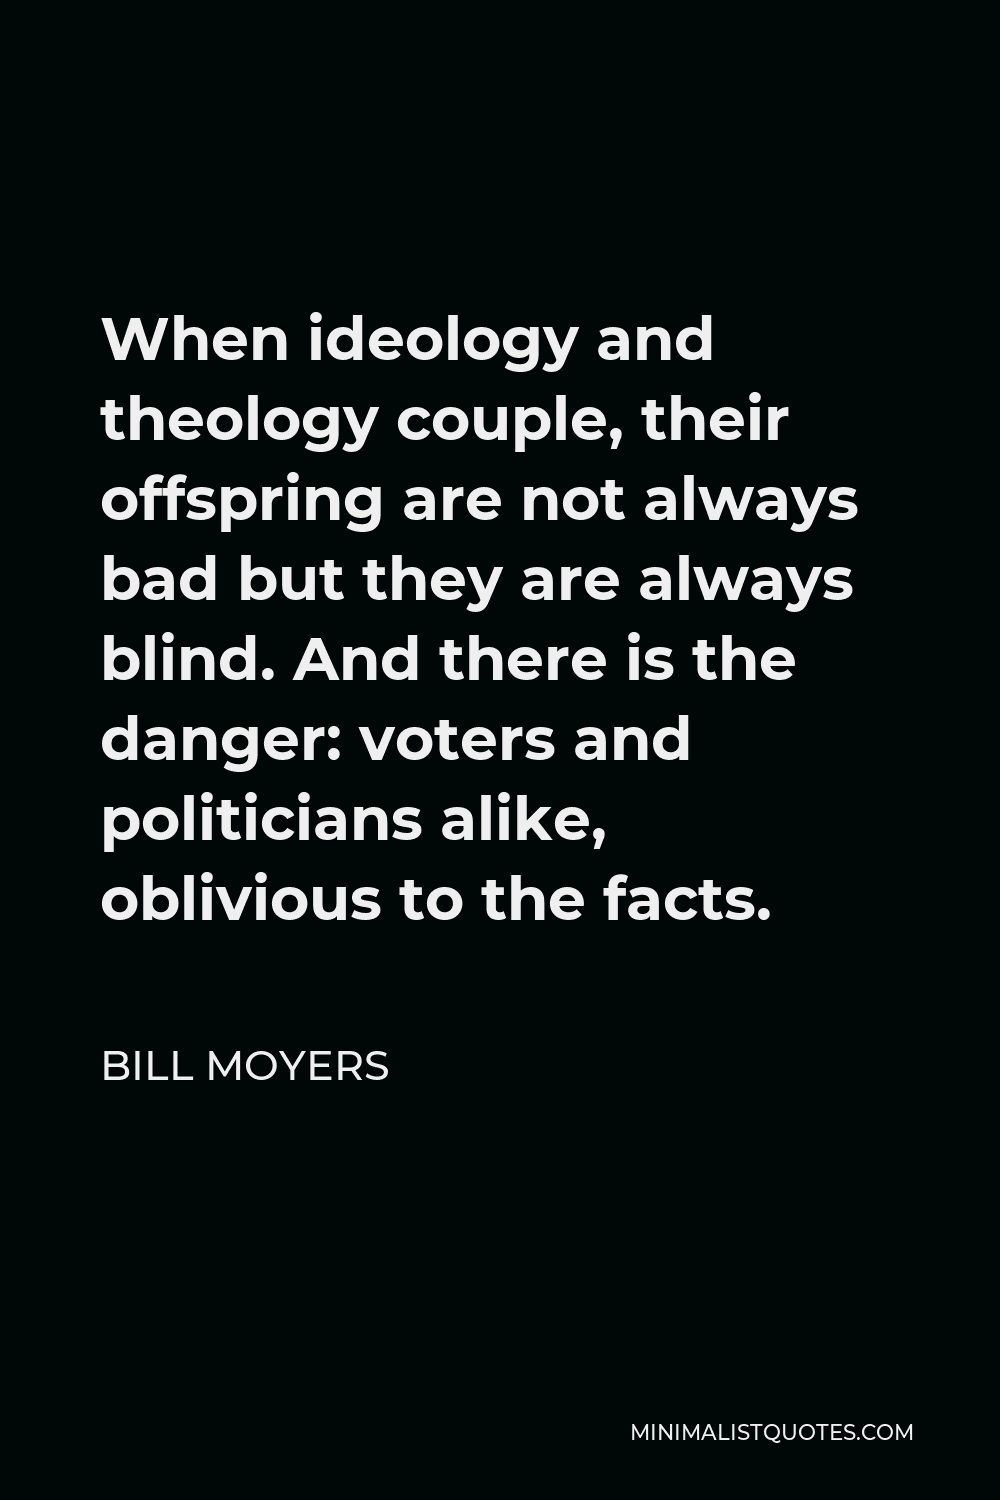 Bill Moyers Quote - When ideology and theology couple, their offspring are not always bad but they are always blind. And there is the danger: voters and politicians alike, oblivious to the facts.